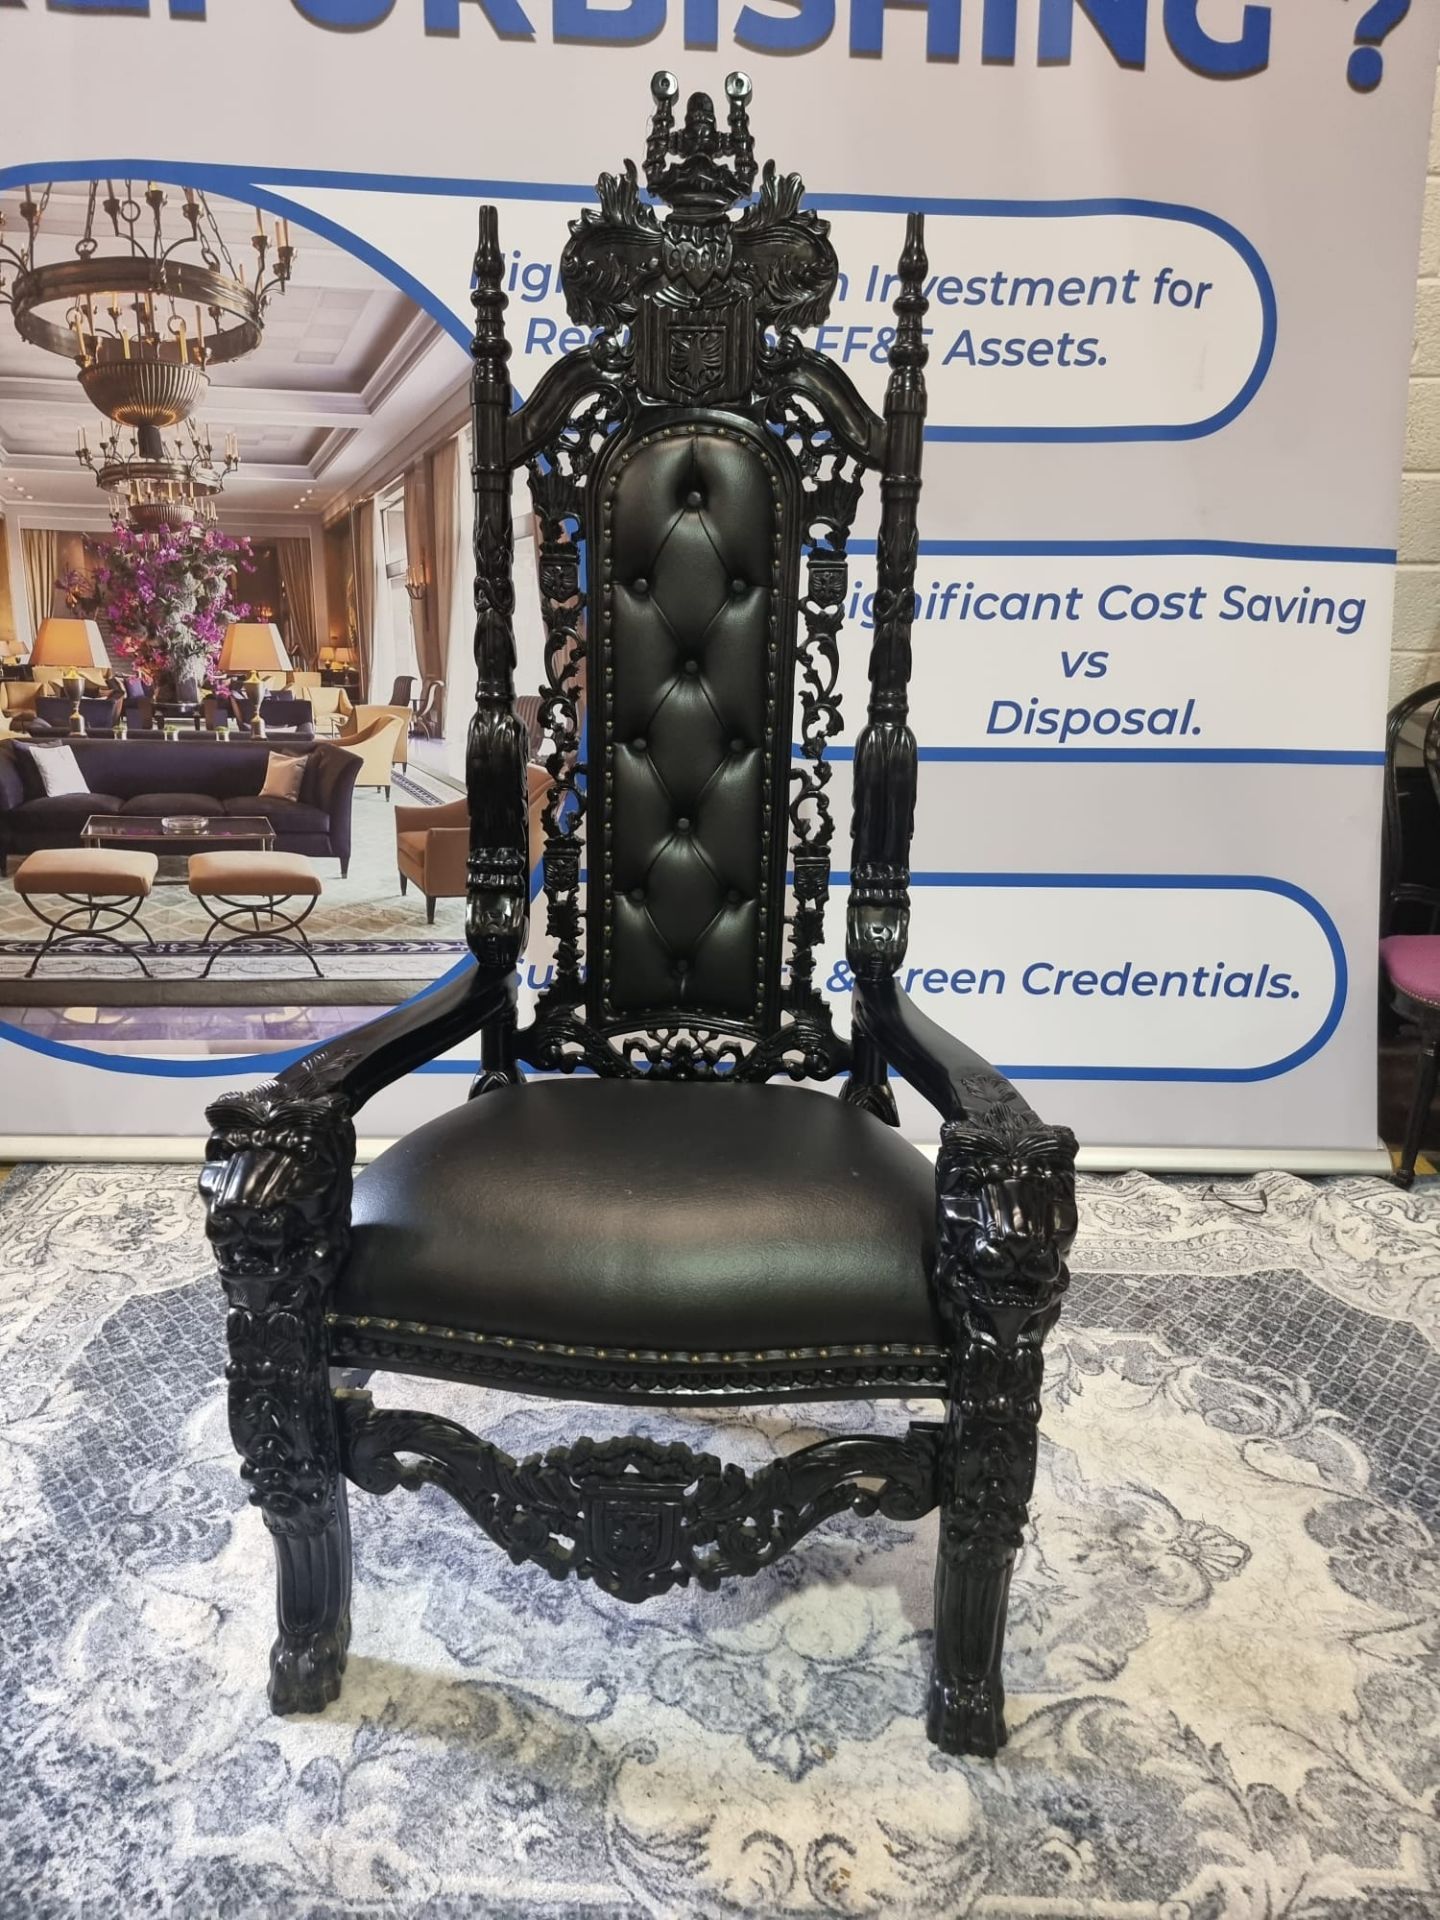 Throne Chair This Antique Style Throne, Ceremonial Or Trophy Chair Was Inspired By A 19th Century - Image 2 of 2